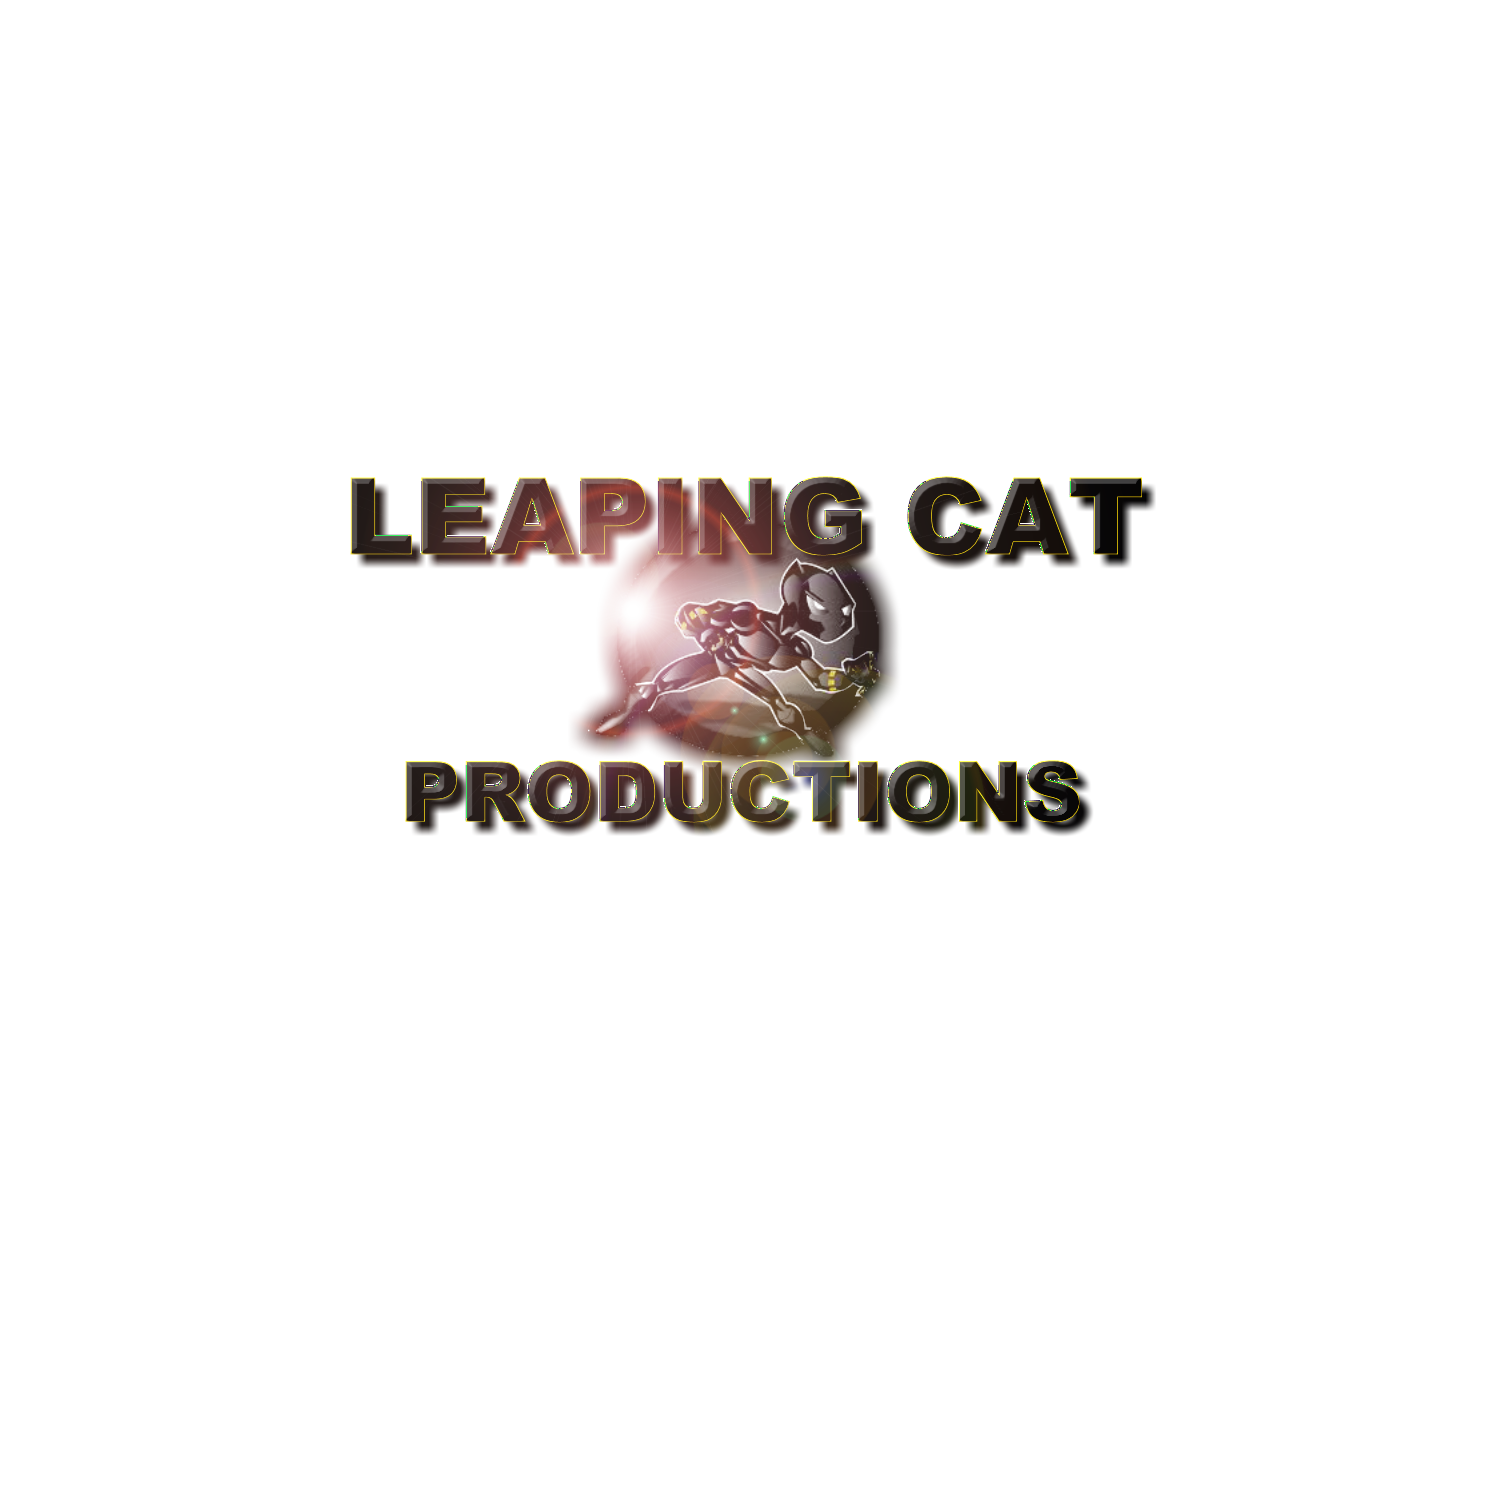 Leaping Cat Productions